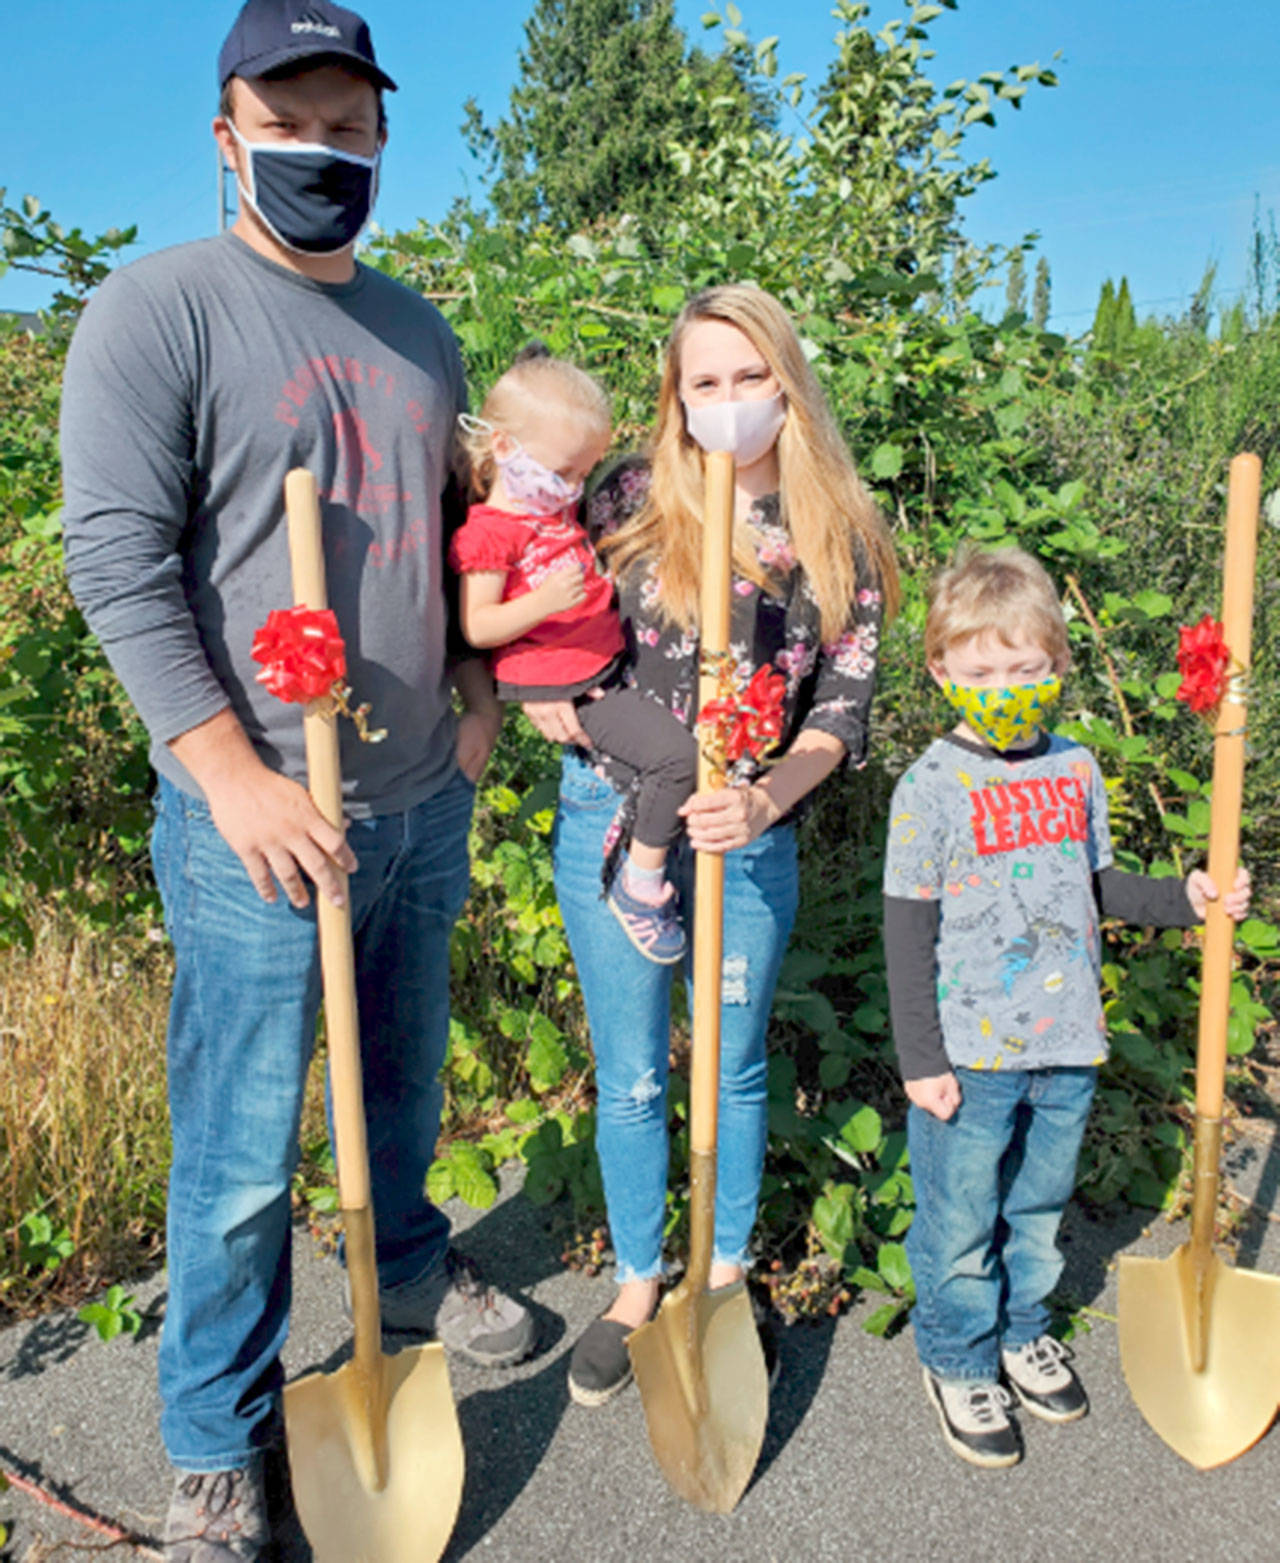 The Whidden family, from left, Michael Whidden, Elizabeth Whidden, Samantha Campos and Benjamin Camp break ground for a Peninsula Housing Authority home in Forks. They are one of five families beginning to build homes.